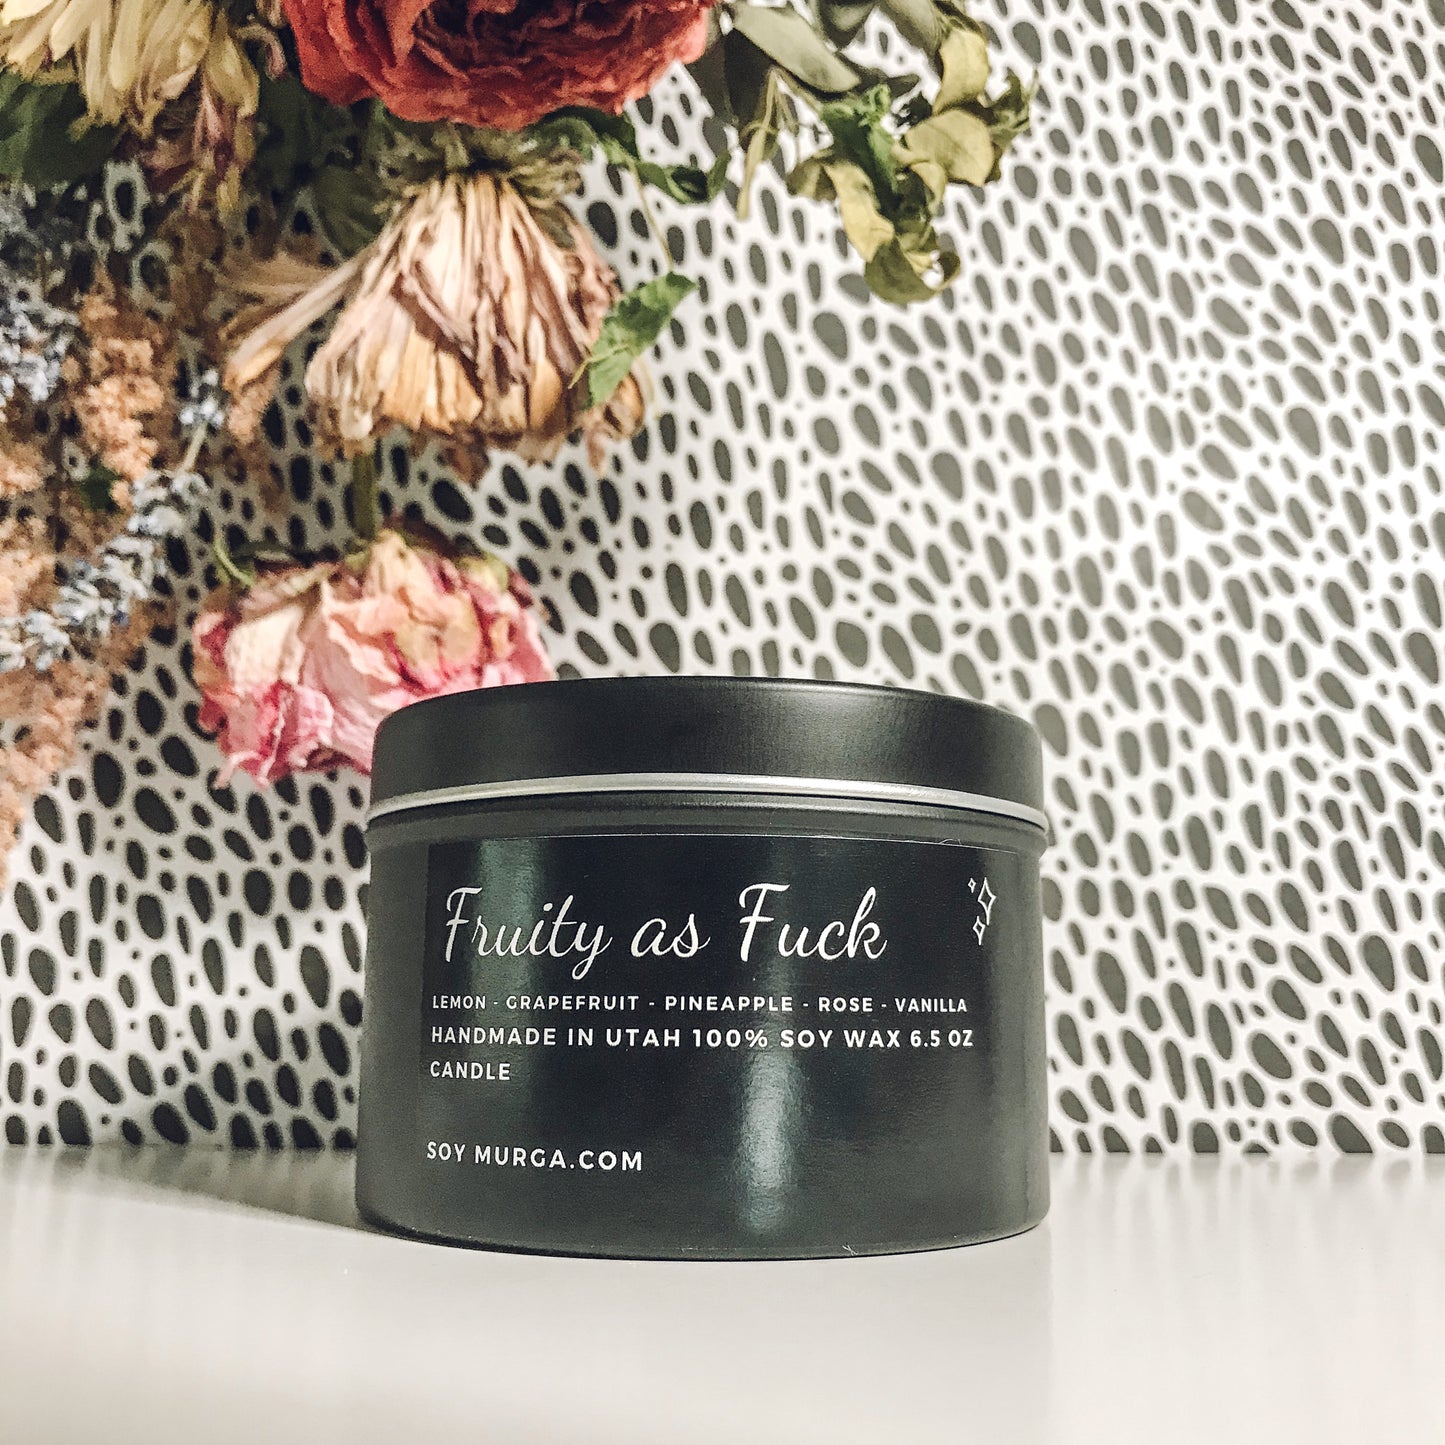 Fruity As Fuck is a bubbly bright and loud fruity concoction. This blend features Lemon, Grapefruit, Pineapple, Rose and Vanilla